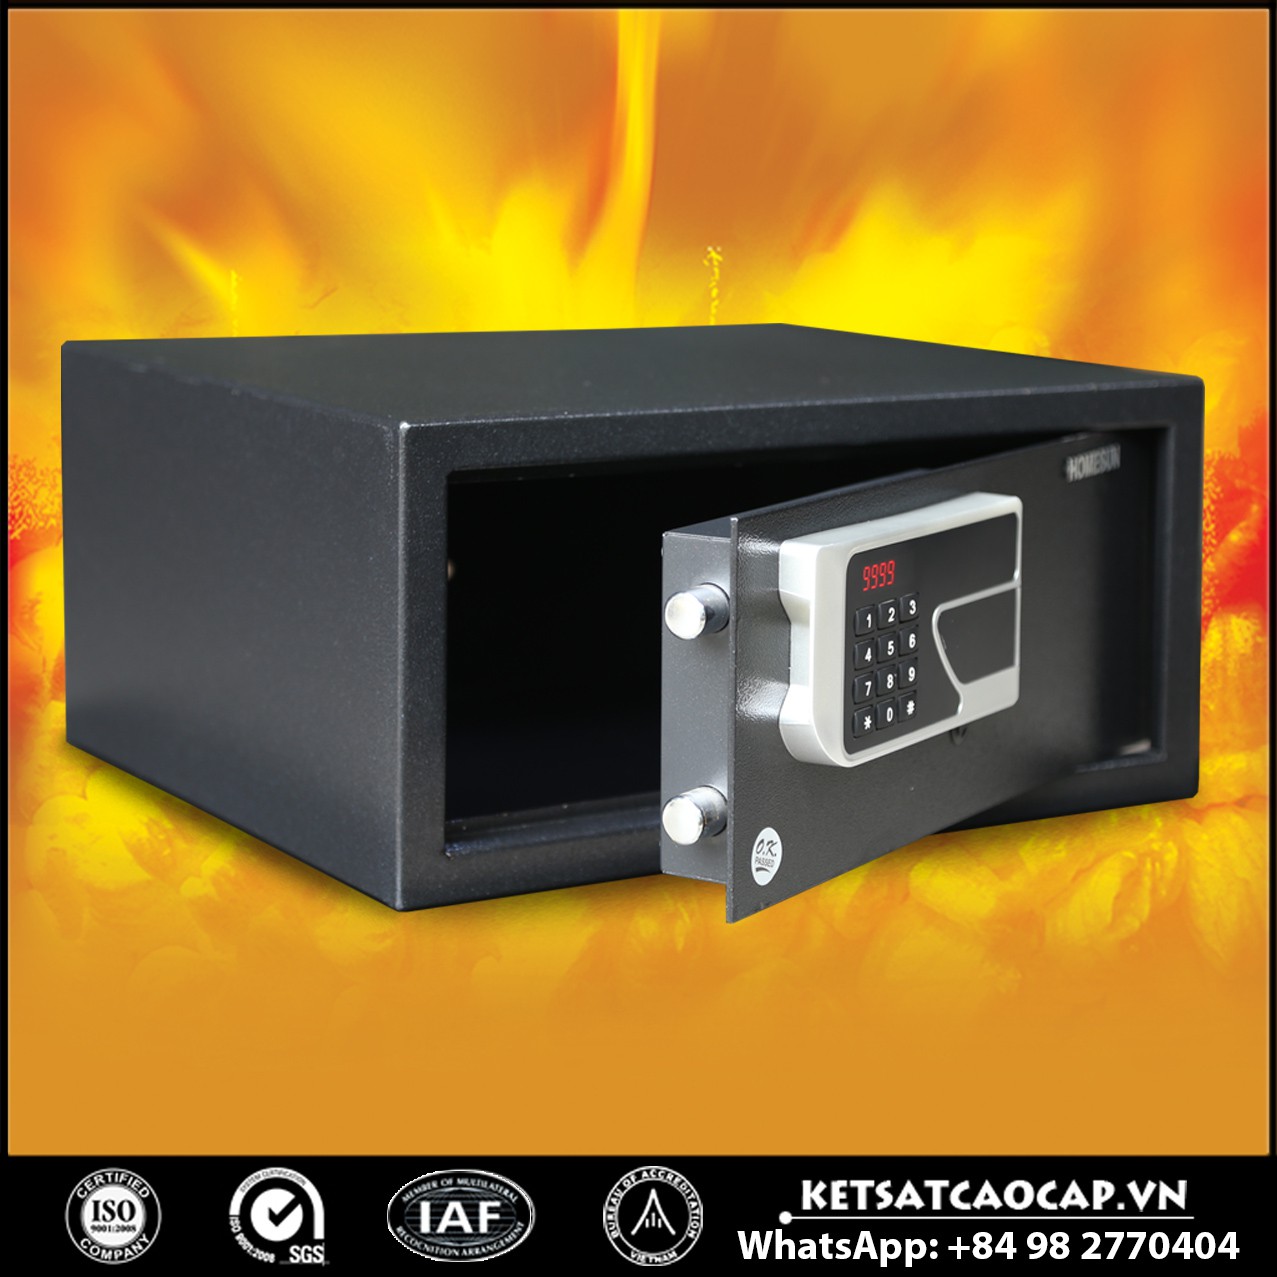 Buy Best Hotel Safe For Home Suppliers and Exporters in Australia Online